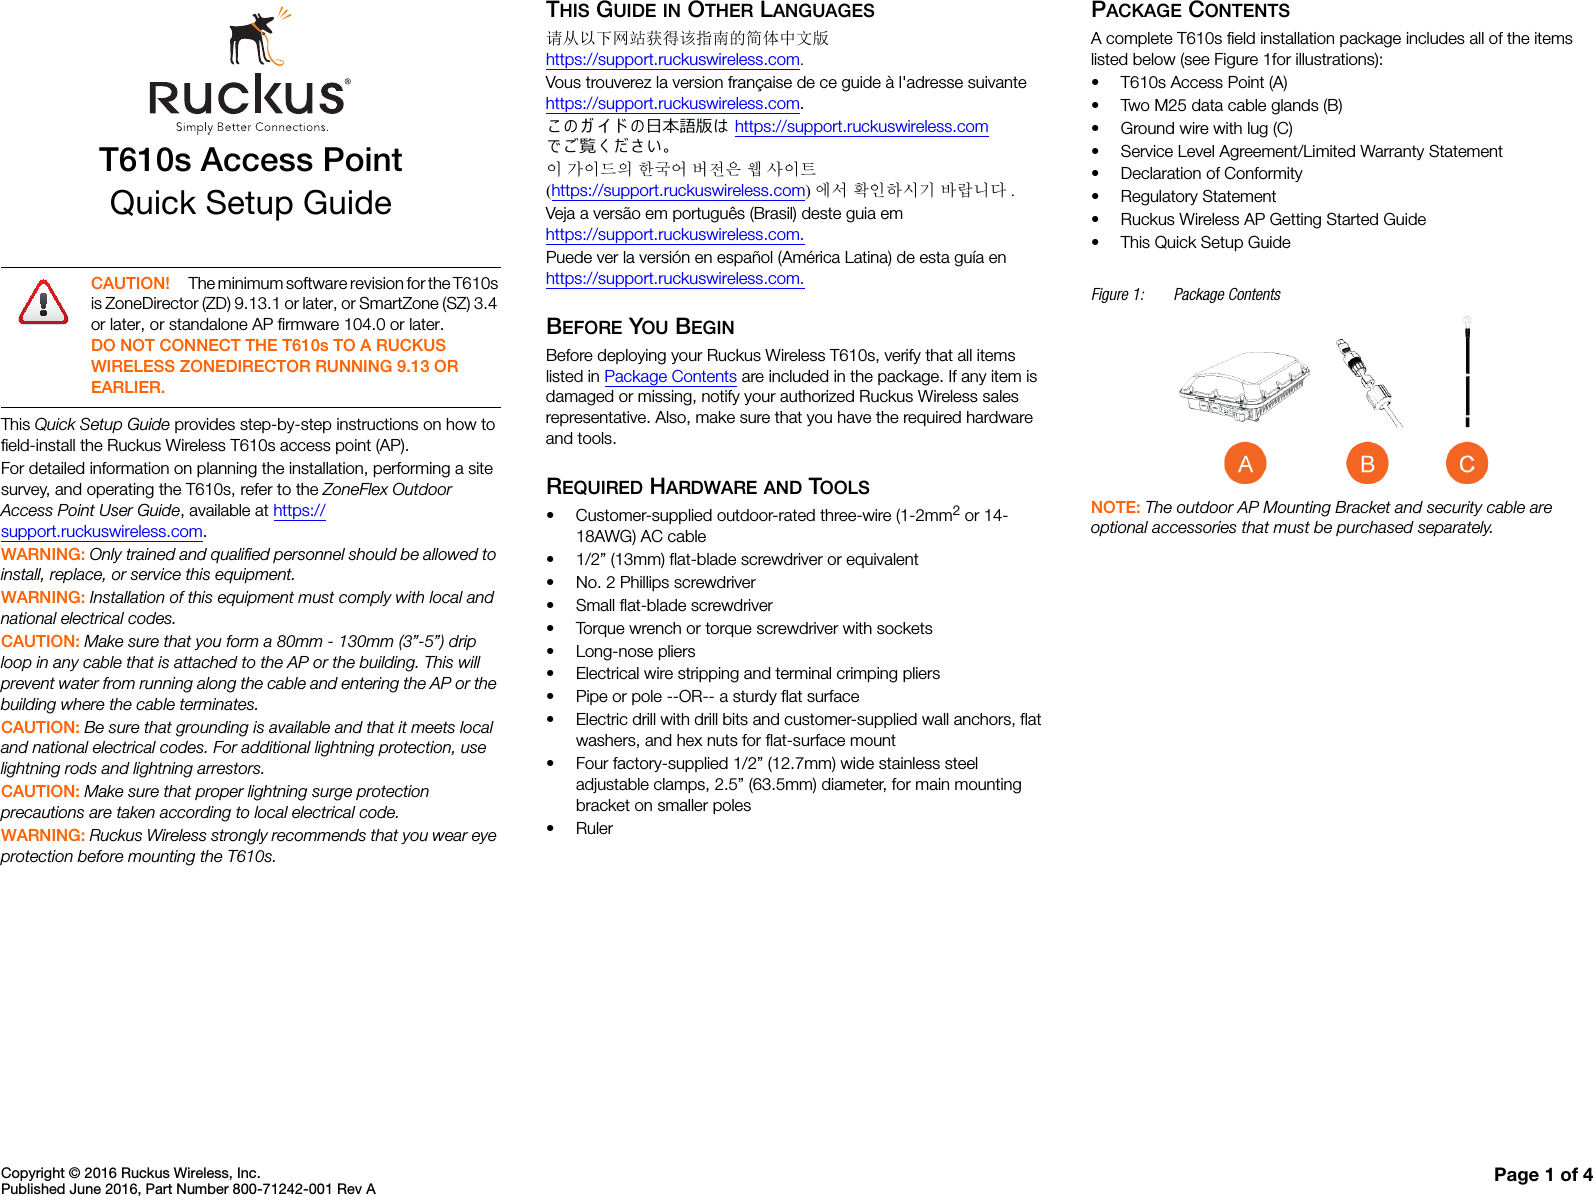 Copyright © 2016 Ruckus Wireless, Inc.Published June 2016, Part Number 800-71242-001 Rev A Page 1 of 4T610s Access PointQuick Setup GuideThis Quick Setup Guide provides step-by-step instructions on how to field-install the Ruckus Wireless T610s access point (AP).For detailed information on planning the installation, performing a site survey, and operating the T610s, refer to the ZoneFlex Outdoor Access Point User Guide, available at https://support.ruckuswireless.com.WARNING: Only trained and qualified personnel should be allowed to install, replace, or service this equipment. WARNING: Installation of this equipment must comply with local and national electrical codes. CAUTION: Make sure that you form a 80mm - 130mm (3”-5”) drip loop in any cable that is attached to the AP or the building. This will prevent water from running along the cable and entering the AP or the building where the cable terminates. CAUTION: Be sure that grounding is available and that it meets local and national electrical codes. For additional lightning protection, use lightning rods and lightning arrestors. CAUTION: Make sure that proper lightning surge protection precautions are taken according to local electrical code. WARNING: Ruckus Wireless strongly recommends that you wear eye protection before mounting the T610s.THIS GUIDE IN OTHER LANGUAGES请从以下网站获得该指南的简体中文版 https://support.ruckuswireless.com.Vous trouverez la version française de ce guide à l&apos;adresse suivante https://support.ruckuswireless.com.こ の ガ イ ド の⽇本語版は https://support.ruckuswireless.com でご覧く ださい。이 가이드의 한국어 버전은 웹 사이트(https://support.ruckuswireless.com)에서 확인하시기 바랍니다 .Veja a versão em português (Brasil) deste guia em https://support.ruckuswireless.com.Puede ver la versión en español (América Latina) de esta guía en https://support.ruckuswireless.com.BEFORE YOU BEGINBefore deploying your Ruckus Wireless T610s, verify that all items listed in Package Contents are included in the package. If any item is damaged or missing, notify your authorized Ruckus Wireless sales representative. Also, make sure that you have the required hardware and tools. REQUIRED HARDWARE AND TOOLS• Customer-supplied outdoor-rated three-wire (1-2mm2 or 14-18AWG) AC cable• 1/2” (13mm) flat-blade screwdriver or equivalent• No. 2 Phillips screwdriver• Small flat-blade screwdriver• Torque wrench or torque screwdriver with sockets• Long-nose pliers• Electrical wire stripping and terminal crimping pliers• Pipe or pole --OR-- a sturdy flat surface• Electric drill with drill bits and customer-supplied wall anchors, flat washers, and hex nuts for flat-surface mount• Four factory-supplied 1/2” (12.7mm) wide stainless steel adjustable clamps, 2.5” (63.5mm) diameter, for main mounting bracket on smaller poles•RulerPACKAGE CONTENTSA complete T610s field installation package includes all of the items listed below (see Figure 1for illustrations):• T610s Access Point (A)• Two M25 data cable glands (B)• Ground wire with lug (C)• Service Level Agreement/Limited Warranty Statement• Declaration of Conformity• Regulatory Statement• Ruckus Wireless AP Getting Started Guide• This Quick Setup GuideFigure 1: Package ContentsNOTE: The outdoor AP Mounting Bracket and security cable are optional accessories that must be purchased separately. CAUTION! The minimum software revision for the T610s is ZoneDirector (ZD) 9.13.1 or later, or SmartZone (SZ) 3.4 or later, or standalone AP firmware 104.0 or later.DO NOT CONNECT THE T610s TO A RUCKUS WIRELESS ZONEDIRECTOR RUNNING 9.13 OR EARLIER.